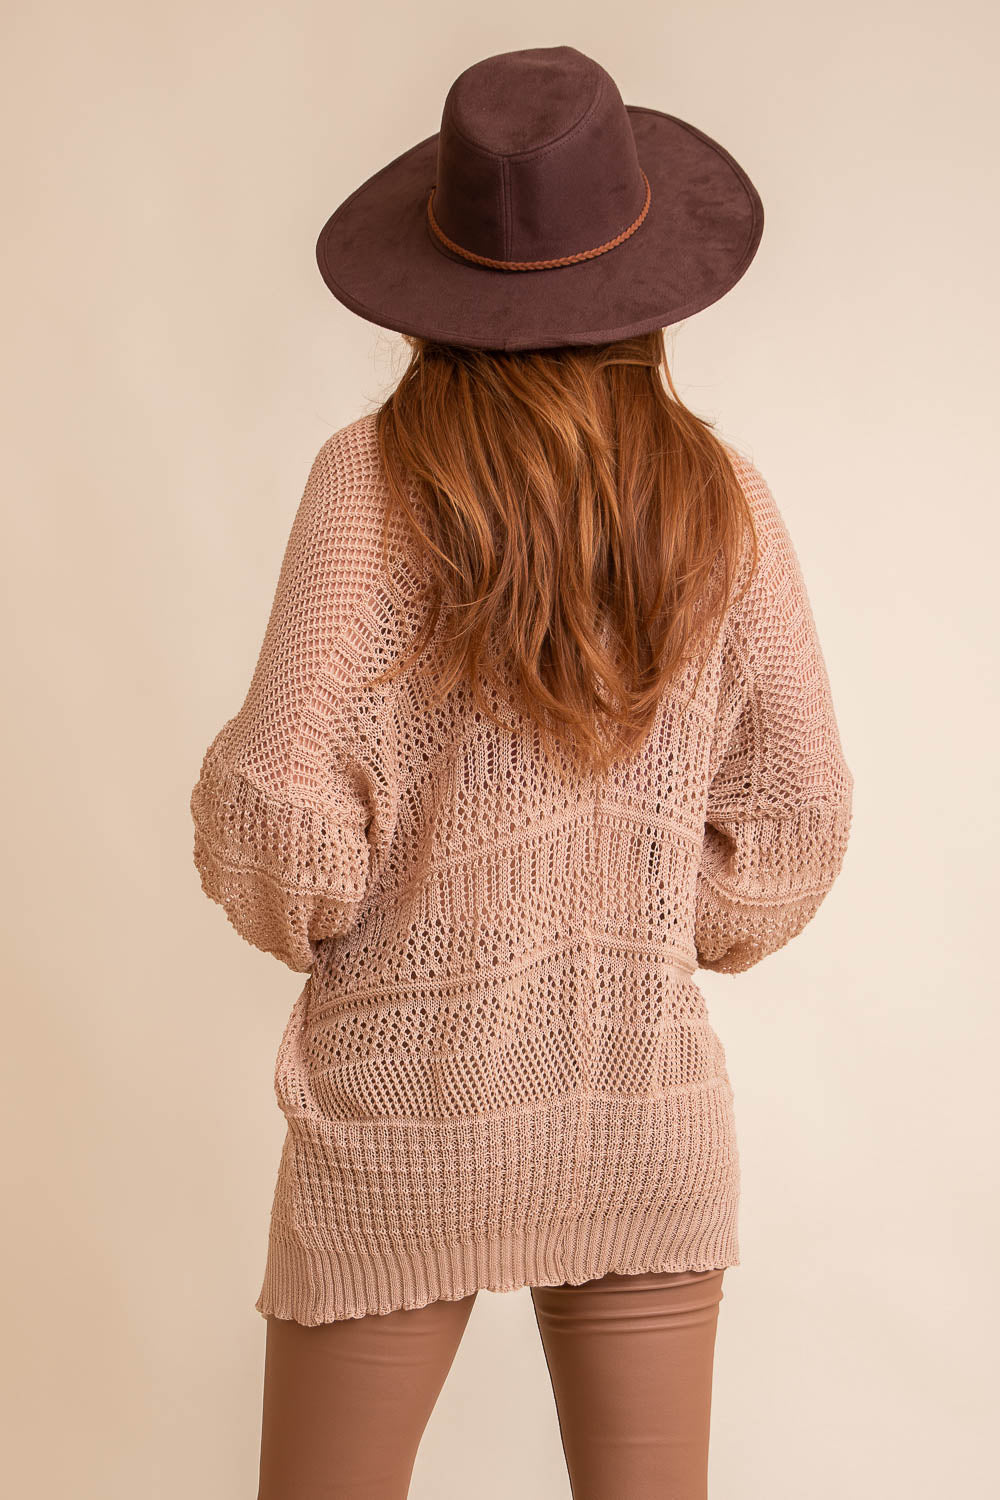 Knit Netted Cardigan ❤️ Cardigan Leto Collection   